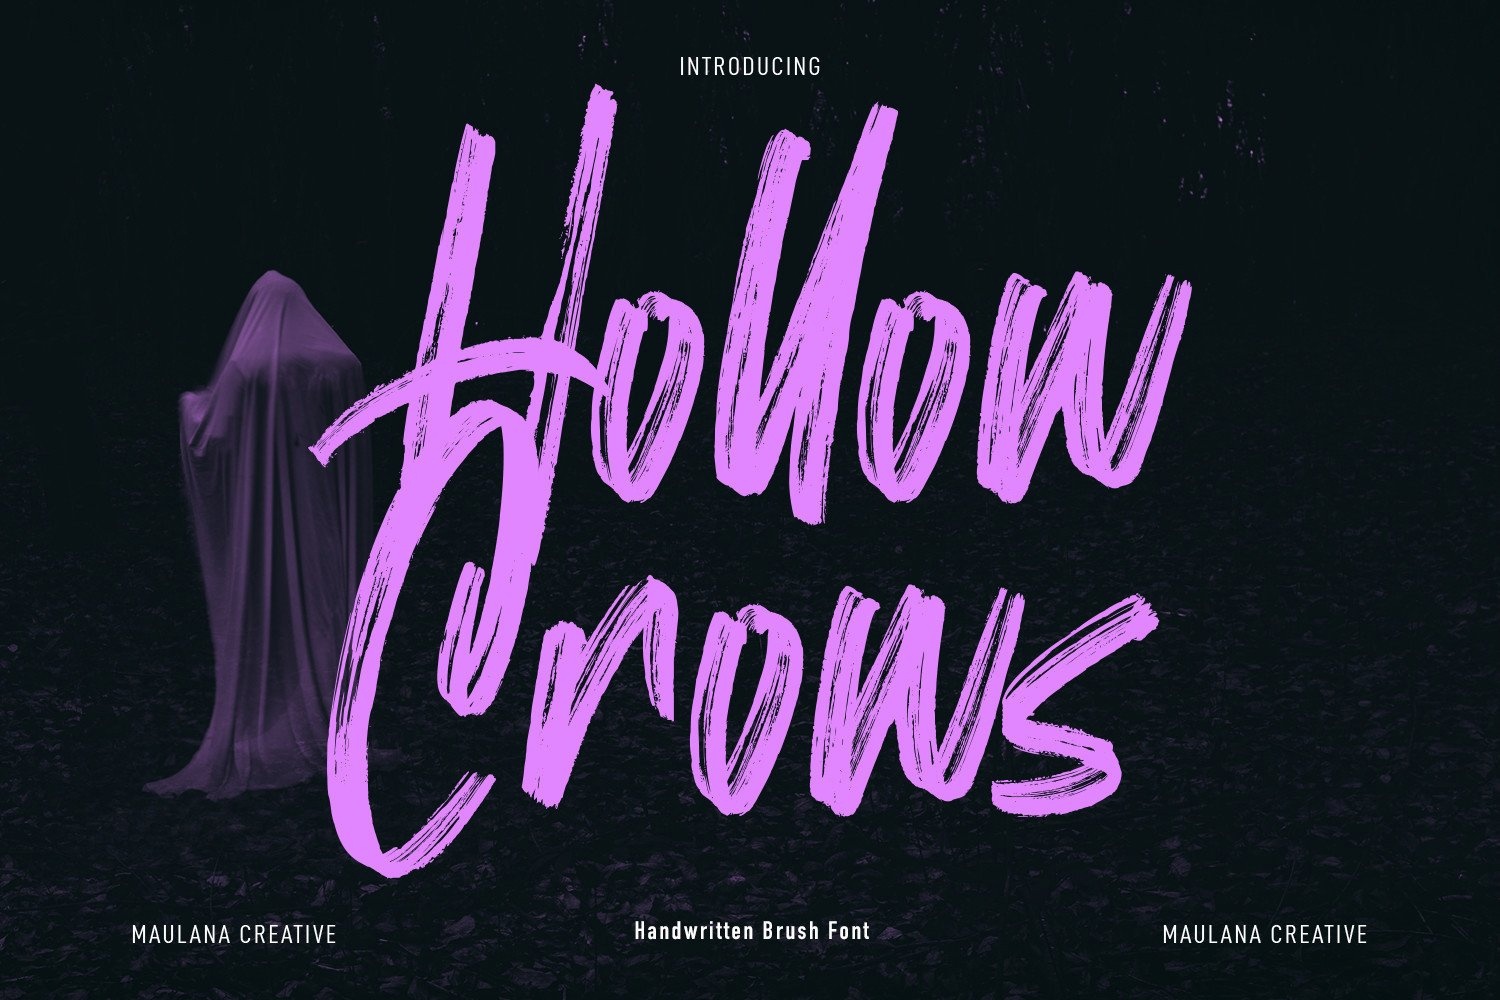 Police Hollow Crows